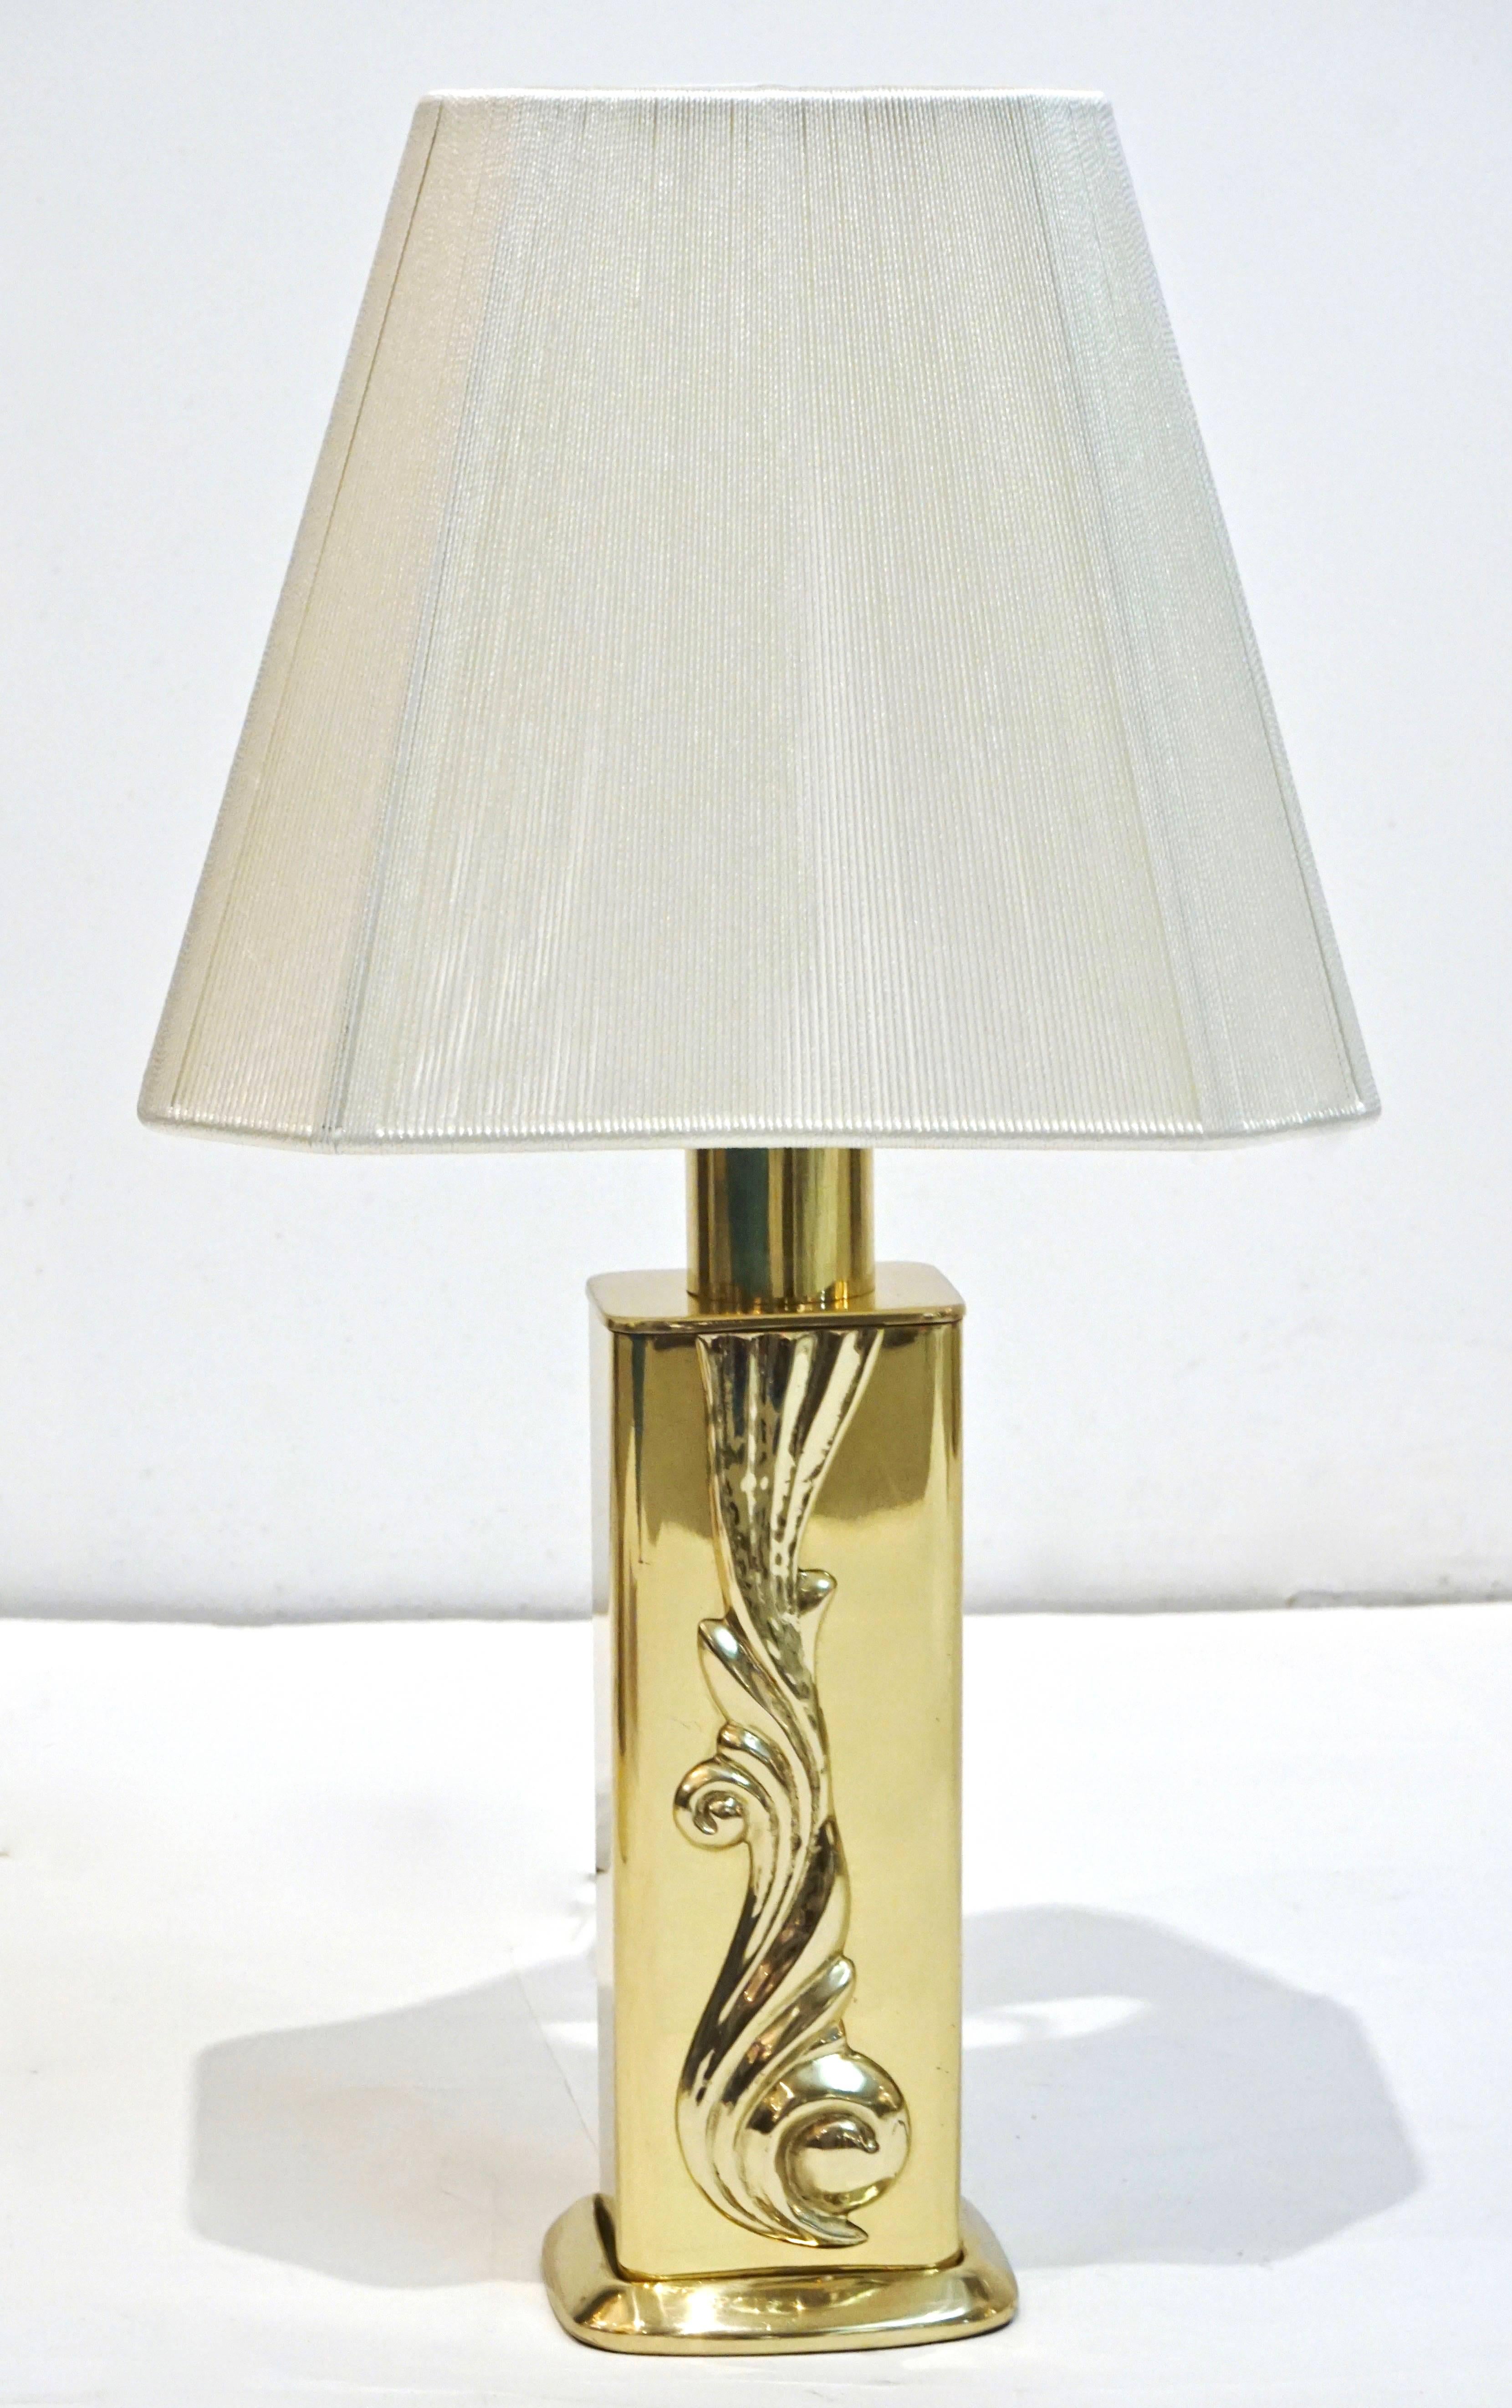 Cast Lipparini 1960s Italian Vintage Pair of Gold Brass Lamps with White Silk Shades